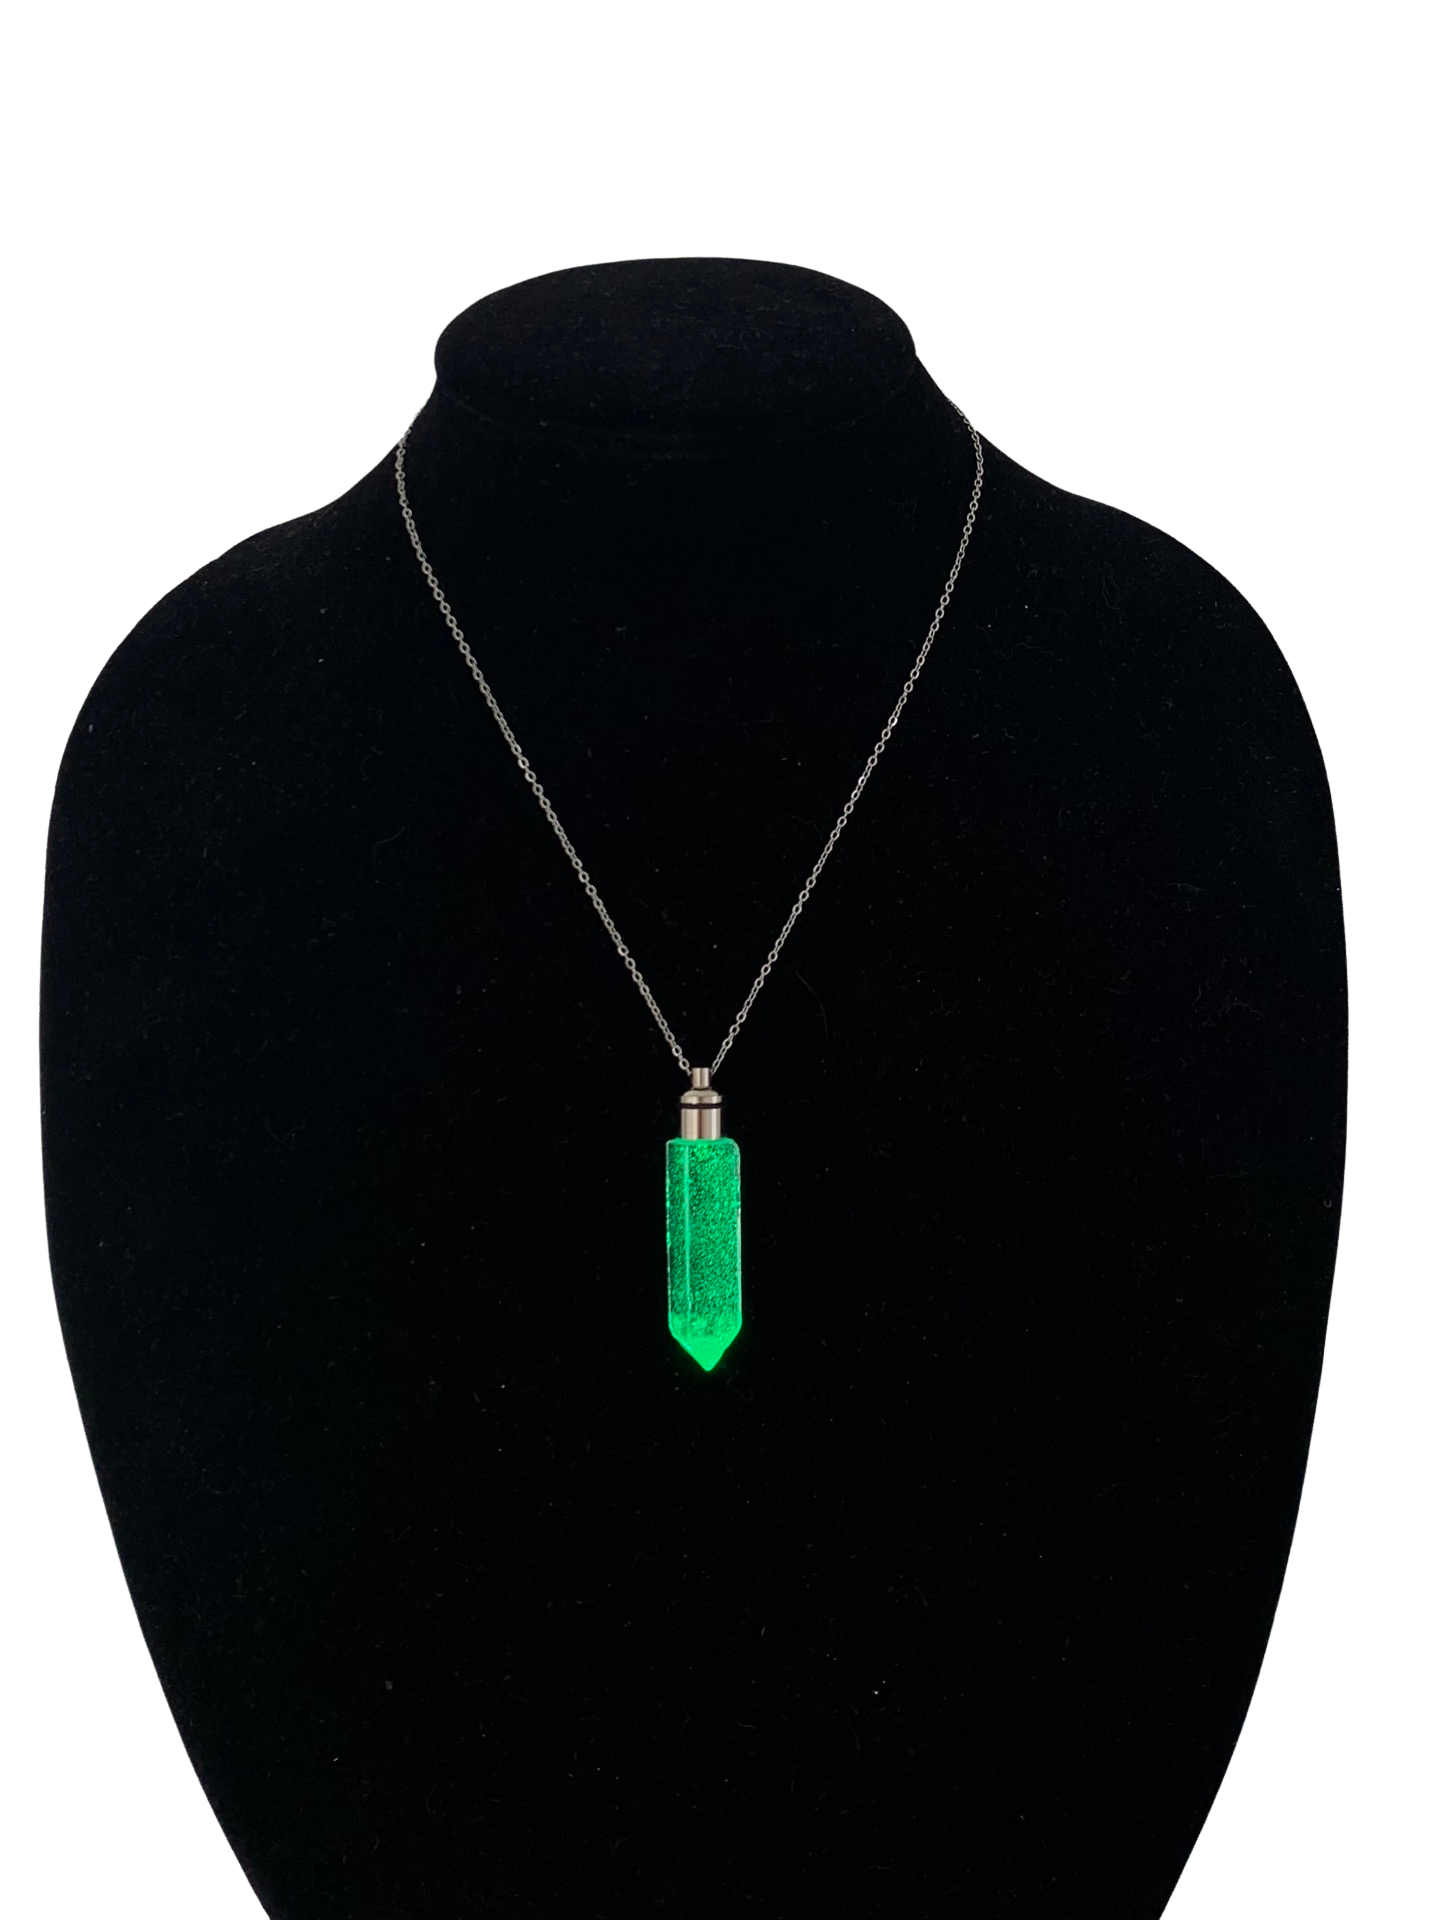 Green LED Crystal Necklace, Glowing, Resin